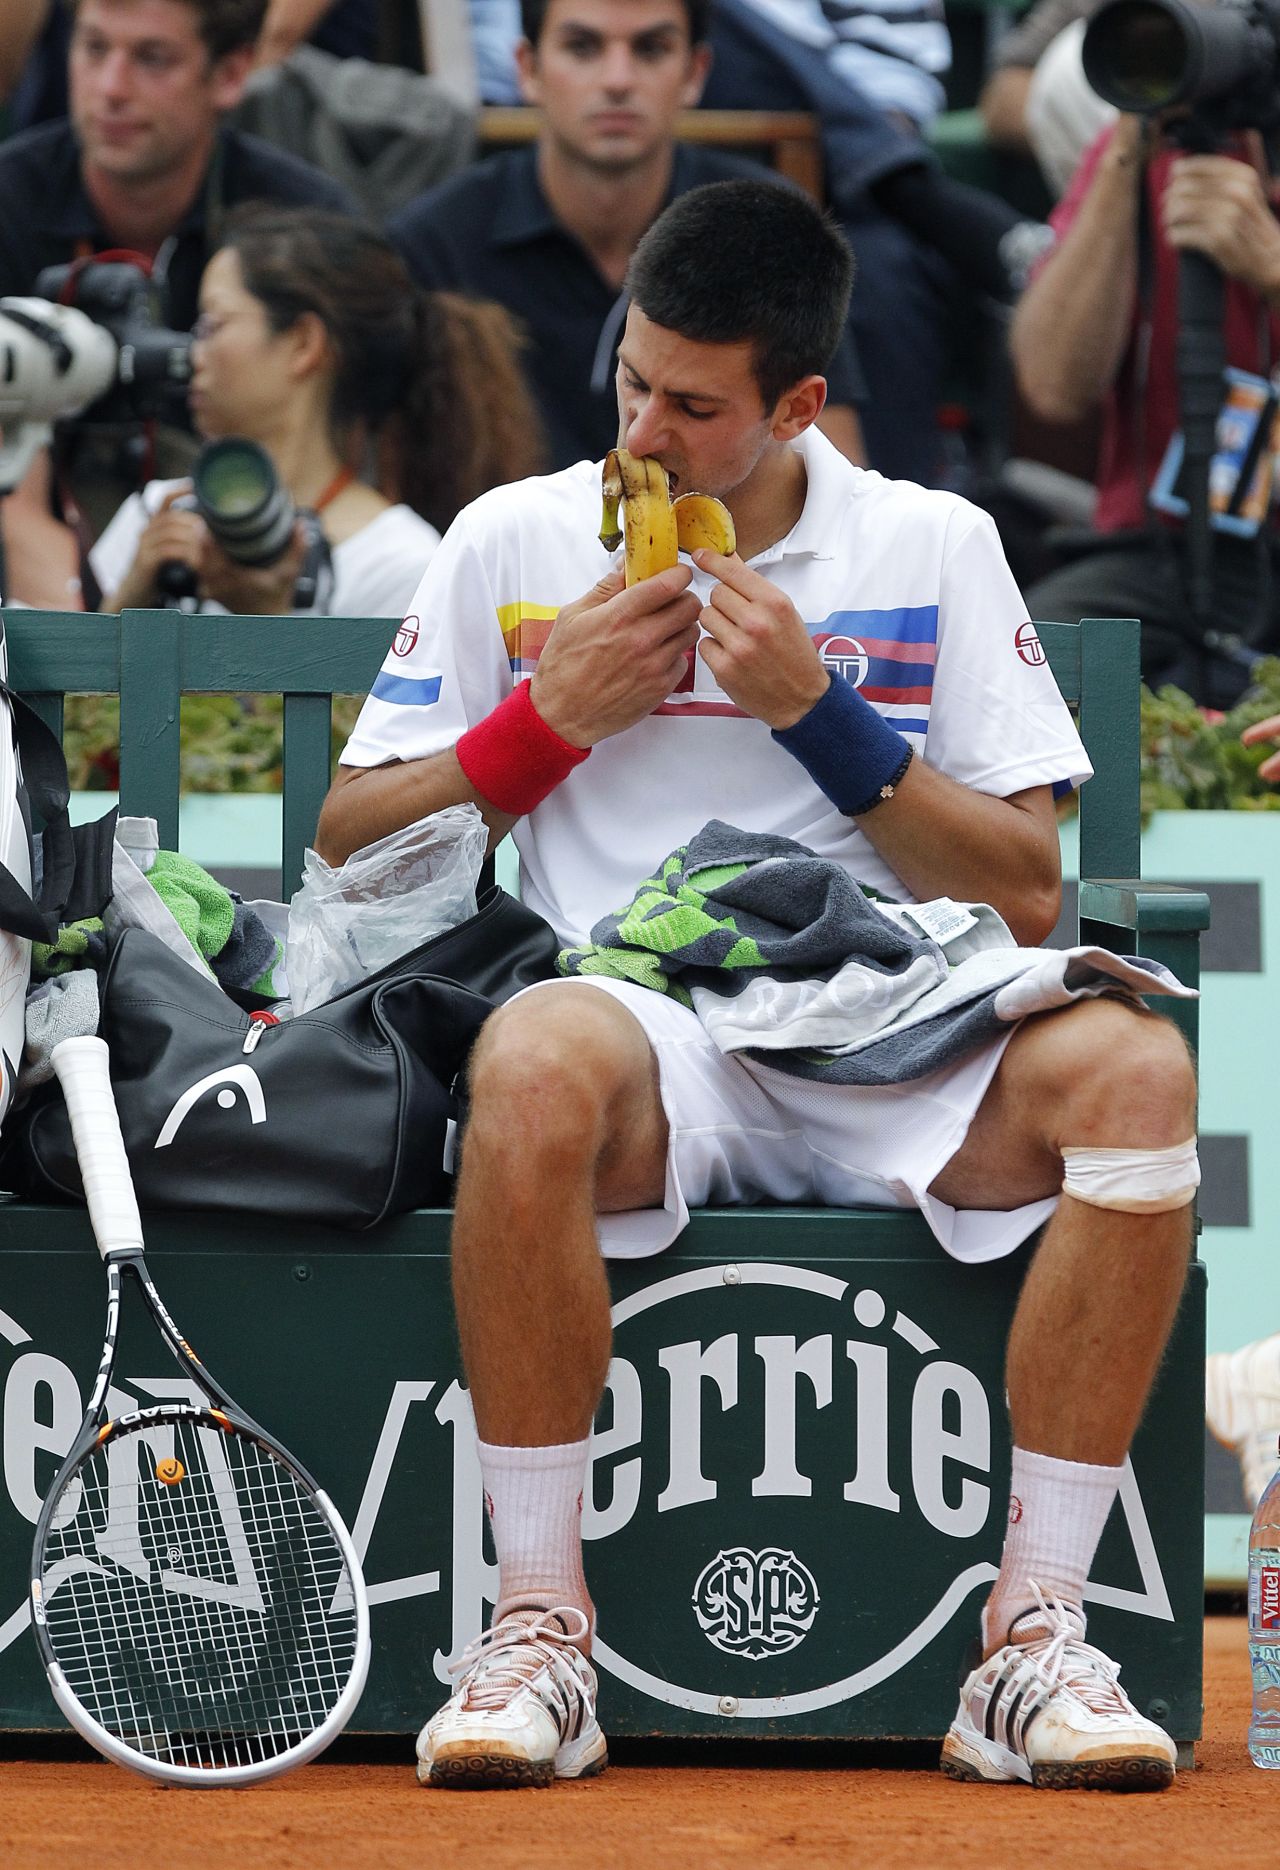 However, Cetojevic said the problem was Djokovic's intolerance to gluten -- which is found in grains such as wheat and their byproducts -- so he had to eliminate it from his diet and add more fruit, rice, vegetables and fish protein. The Serbian has now won a record three successive Australian Open titles.